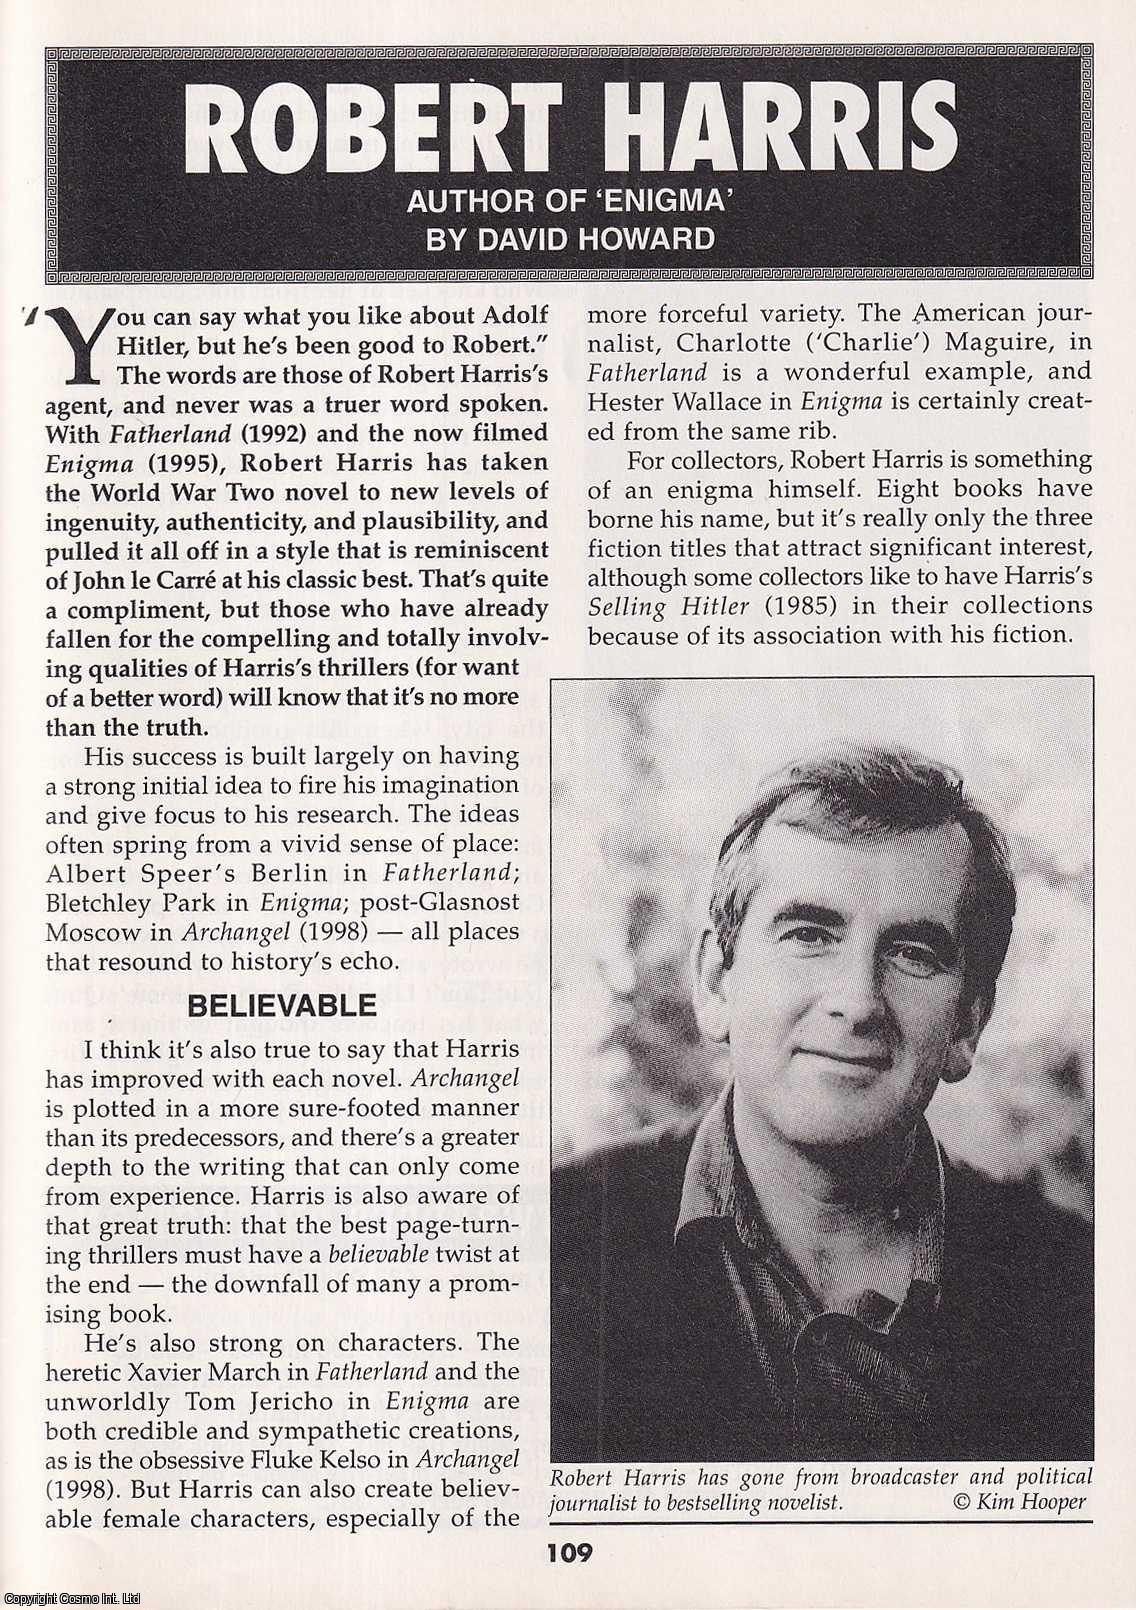 David Howard - Robert Harris. Author of Enigma. This is an original article separated from an issue of The Book & Magazine Collector publication, 2001.